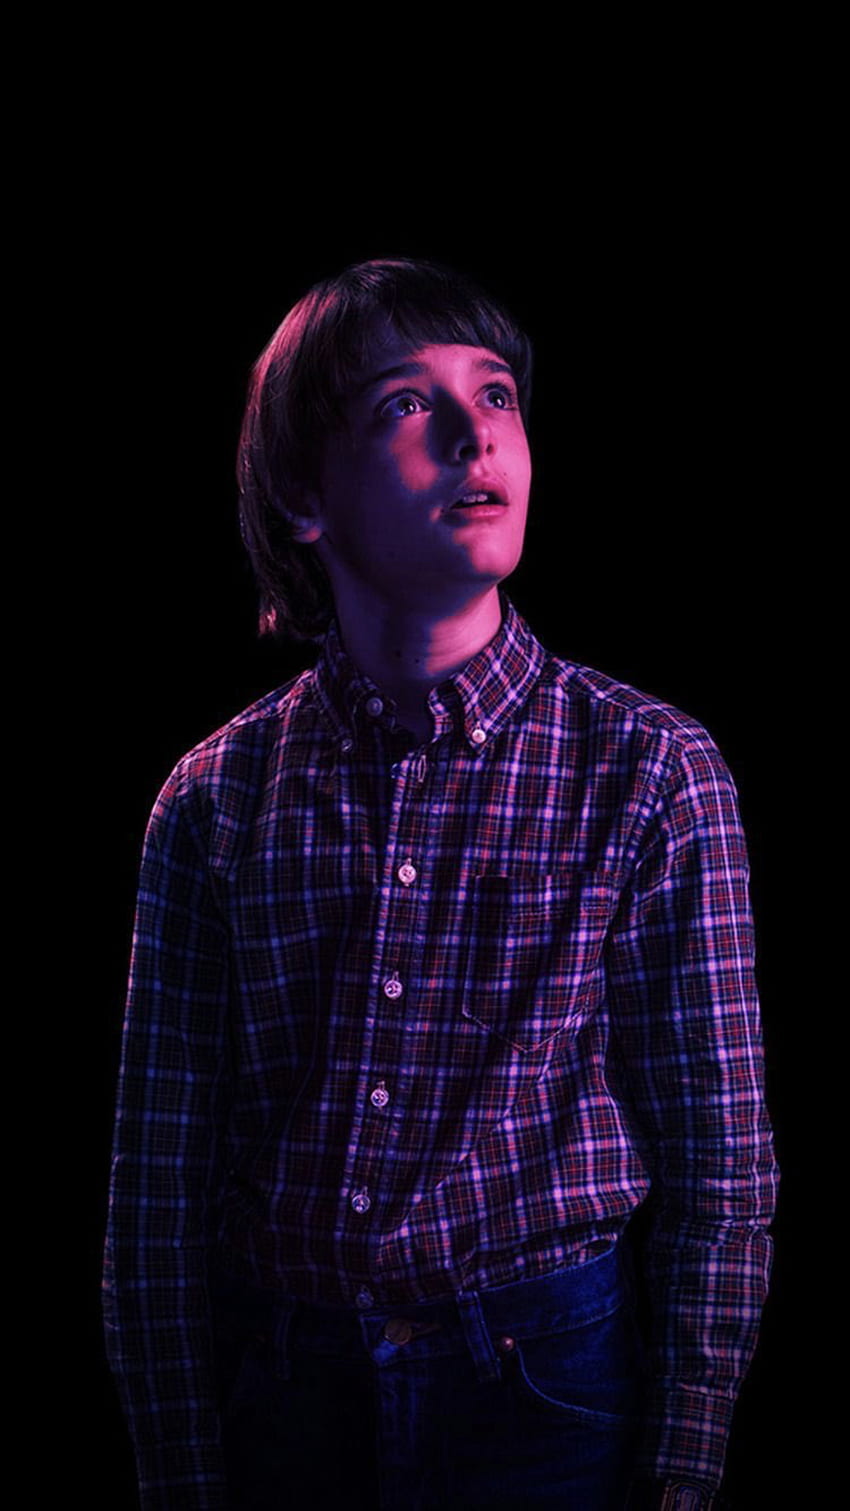 Will Byers wallpaper by Pdiddy19015  Download on ZEDGE  9954